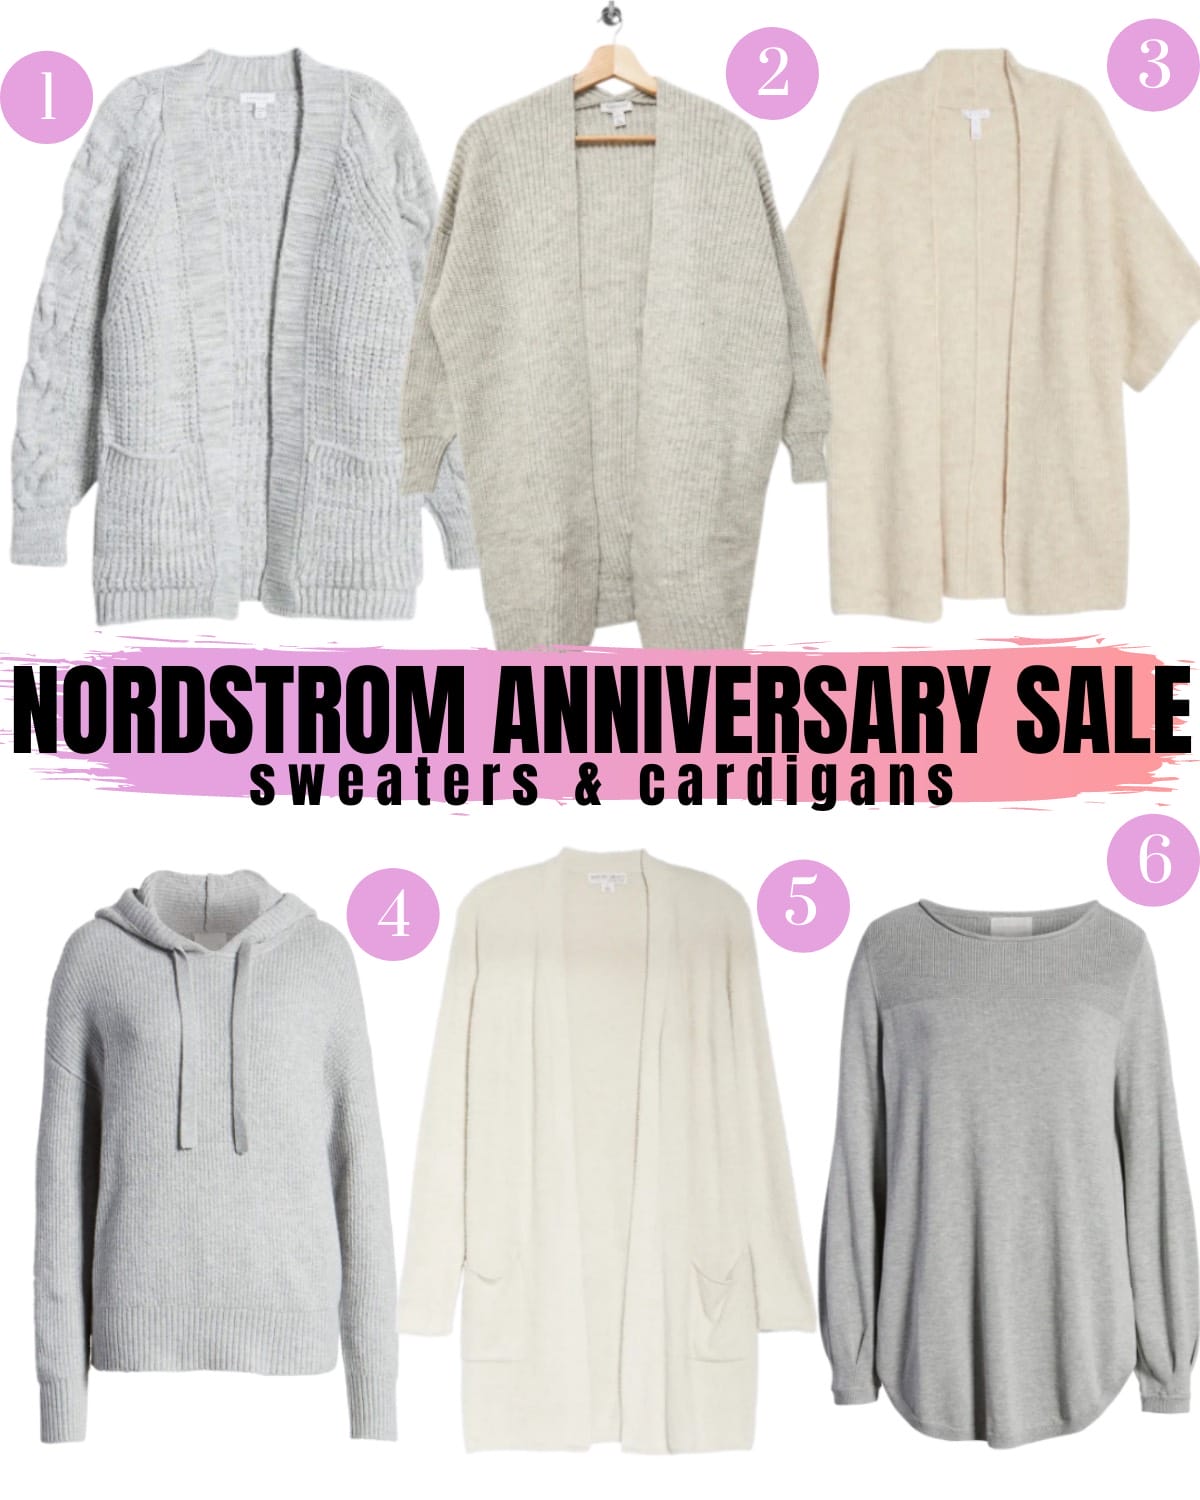 Nordstrom Anniversary Sale 2020 sweaters and cardigans